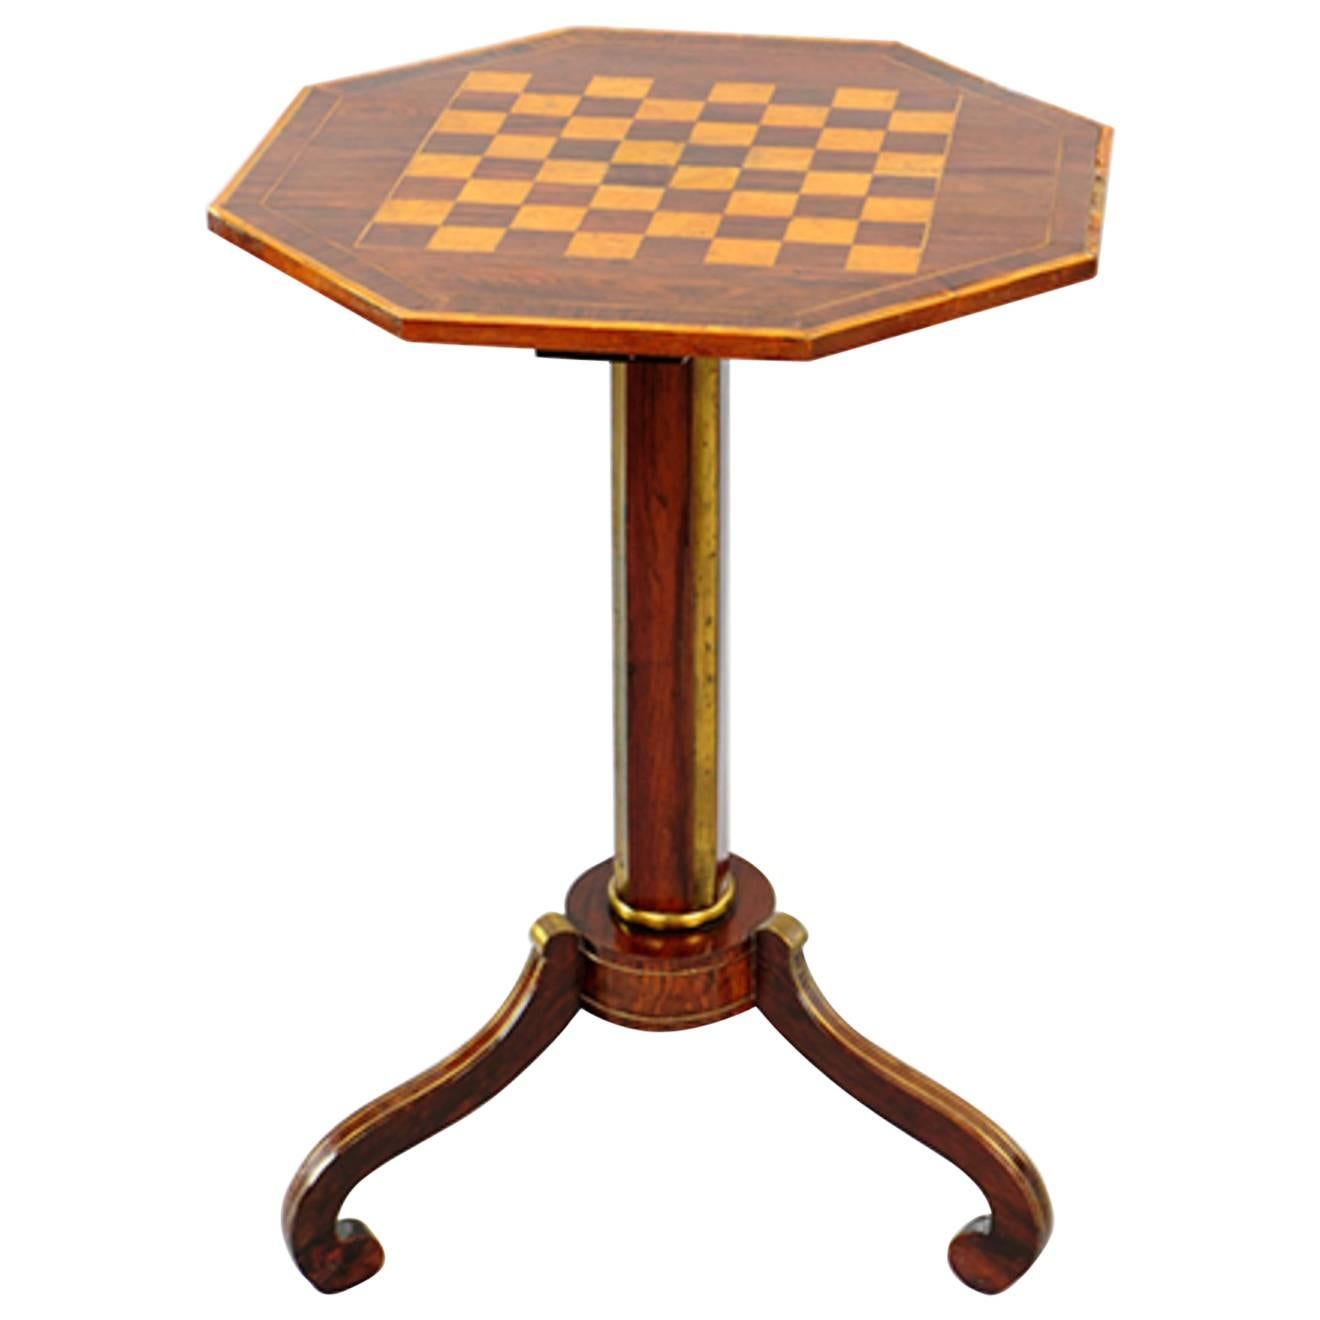 Exceptional Russian Parquetry Inlaid Chess Table with Gilt Mounts.  Great color.